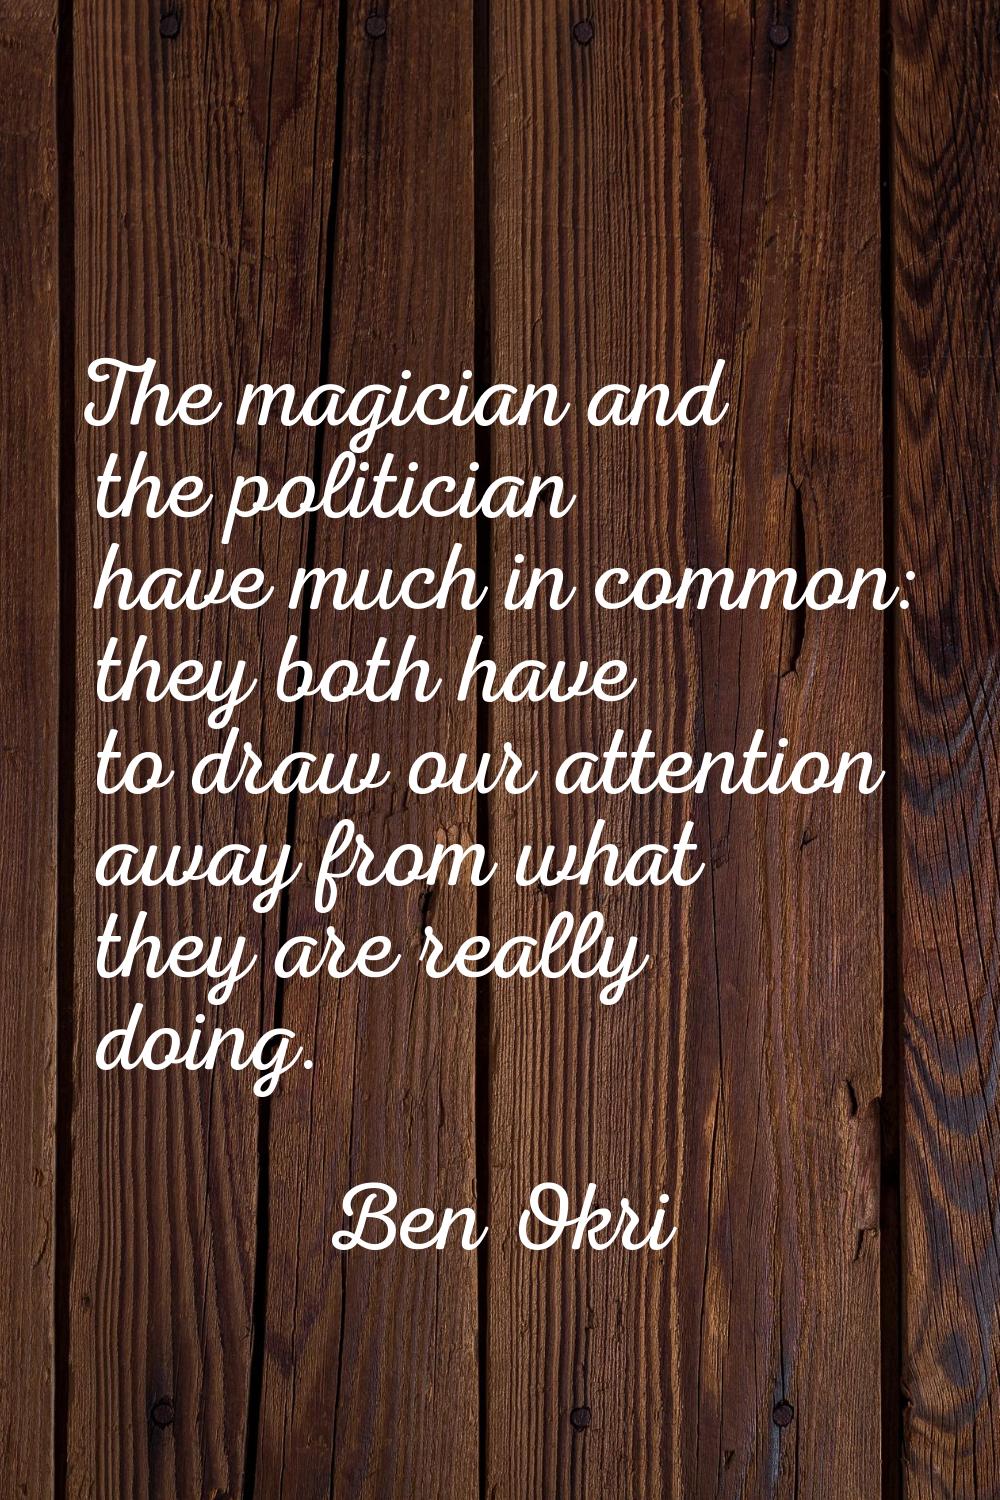 The magician and the politician have much in common: they both have to draw our attention away from